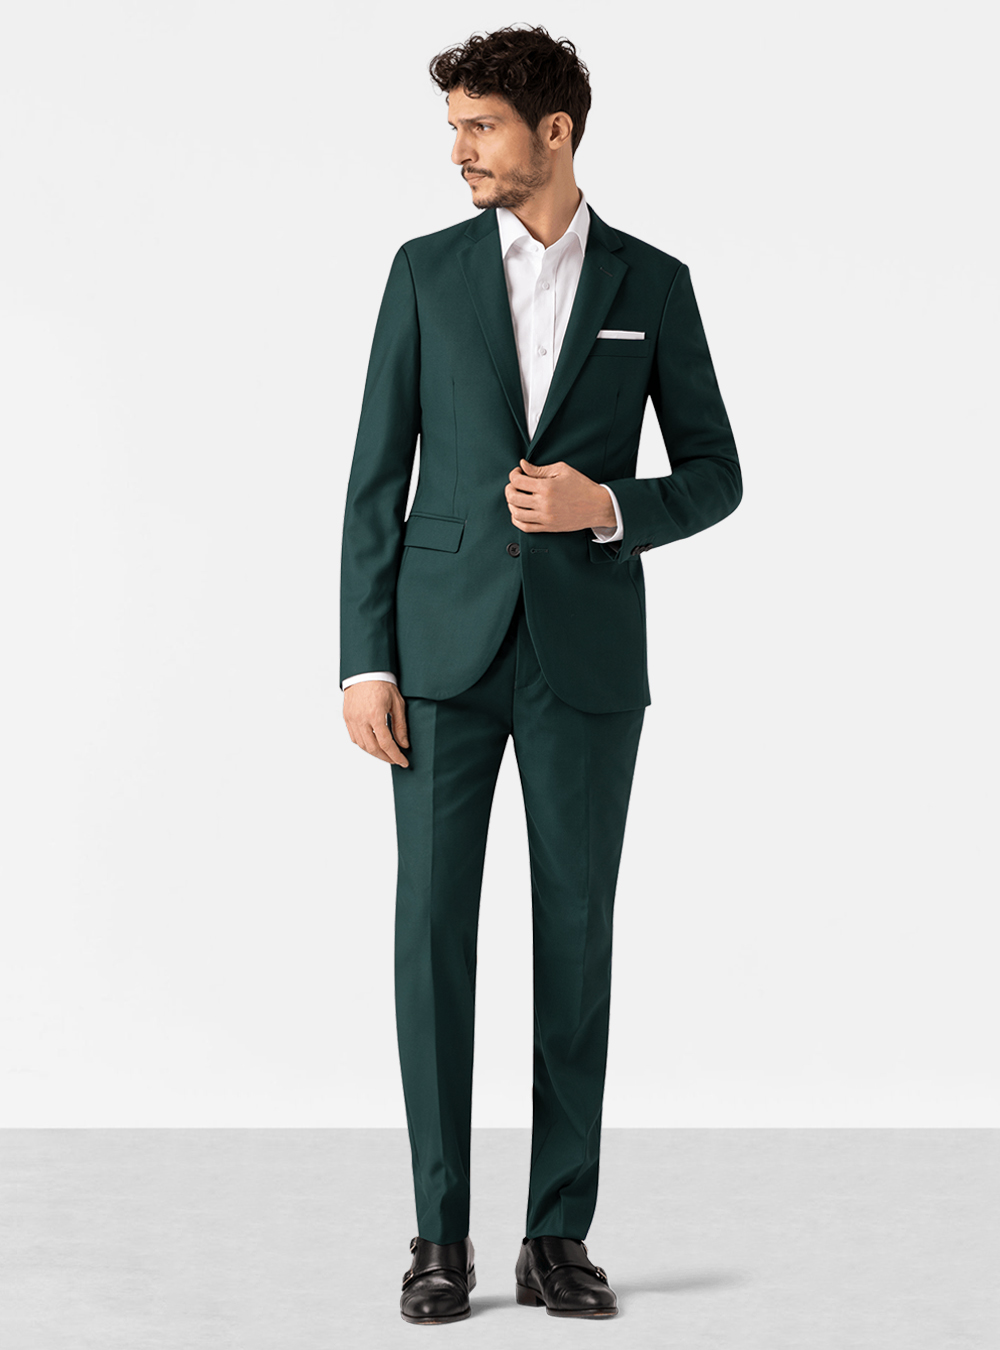 Green suit, white dress shirt and black monk straps